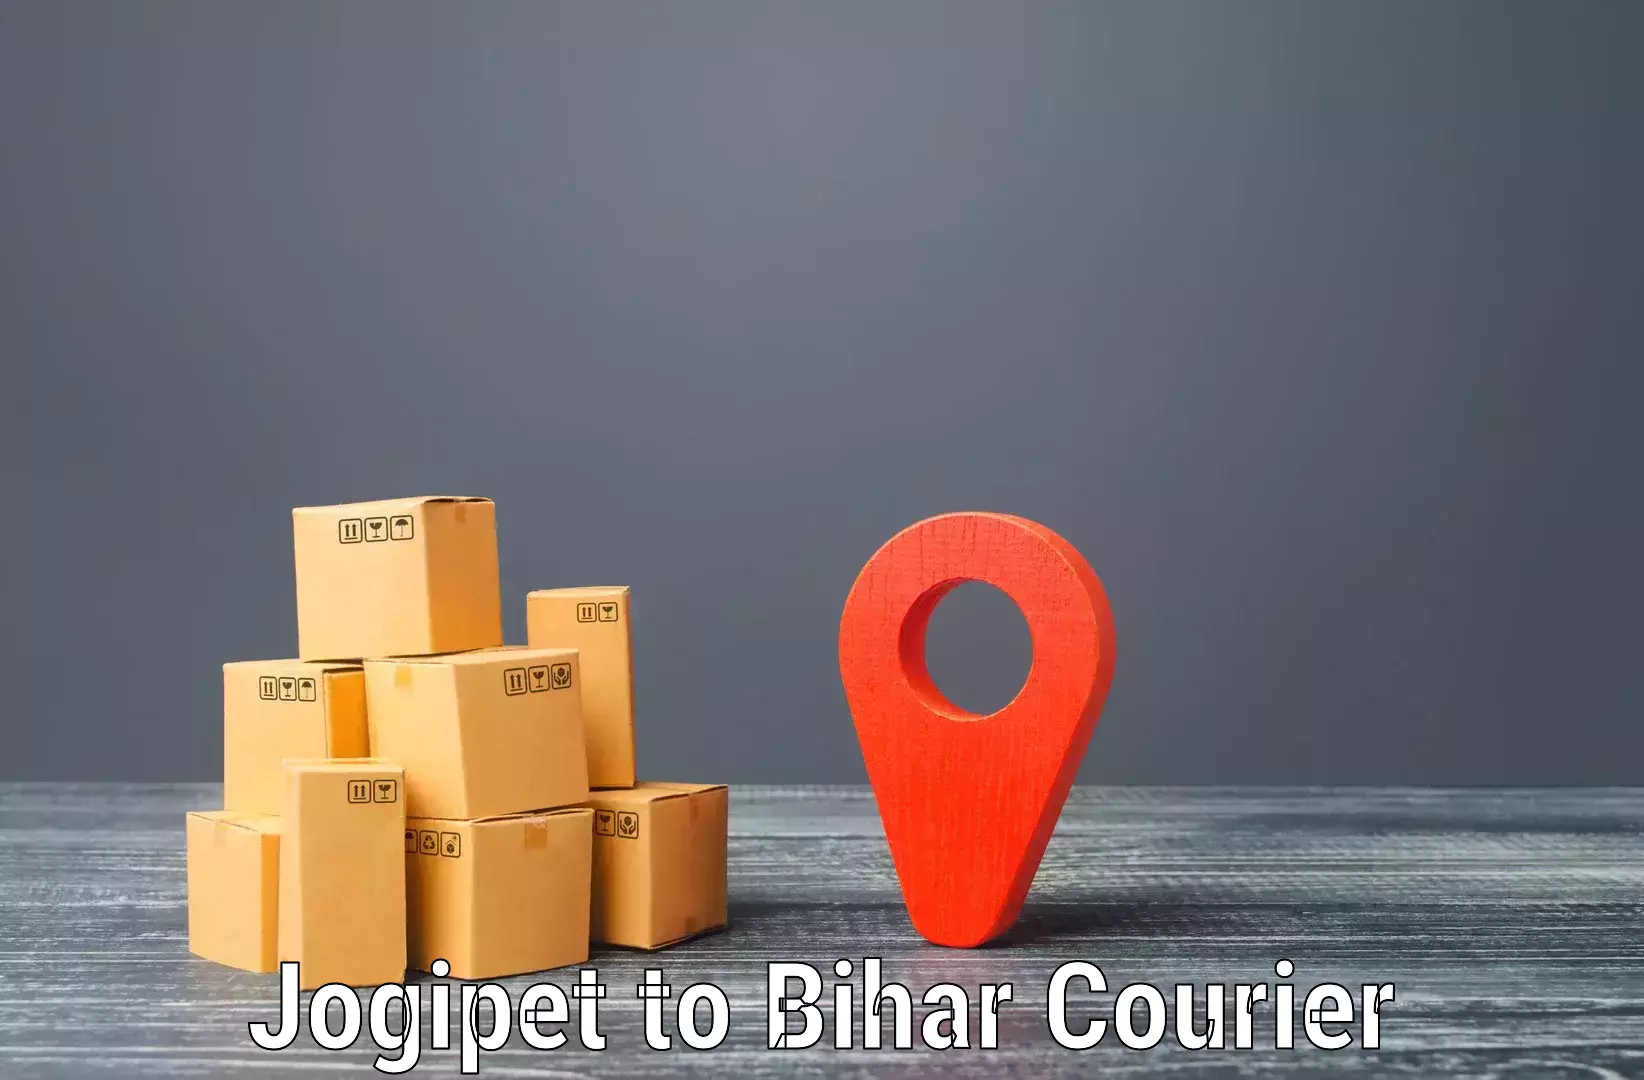 Express mail service Jogipet to Ghogha